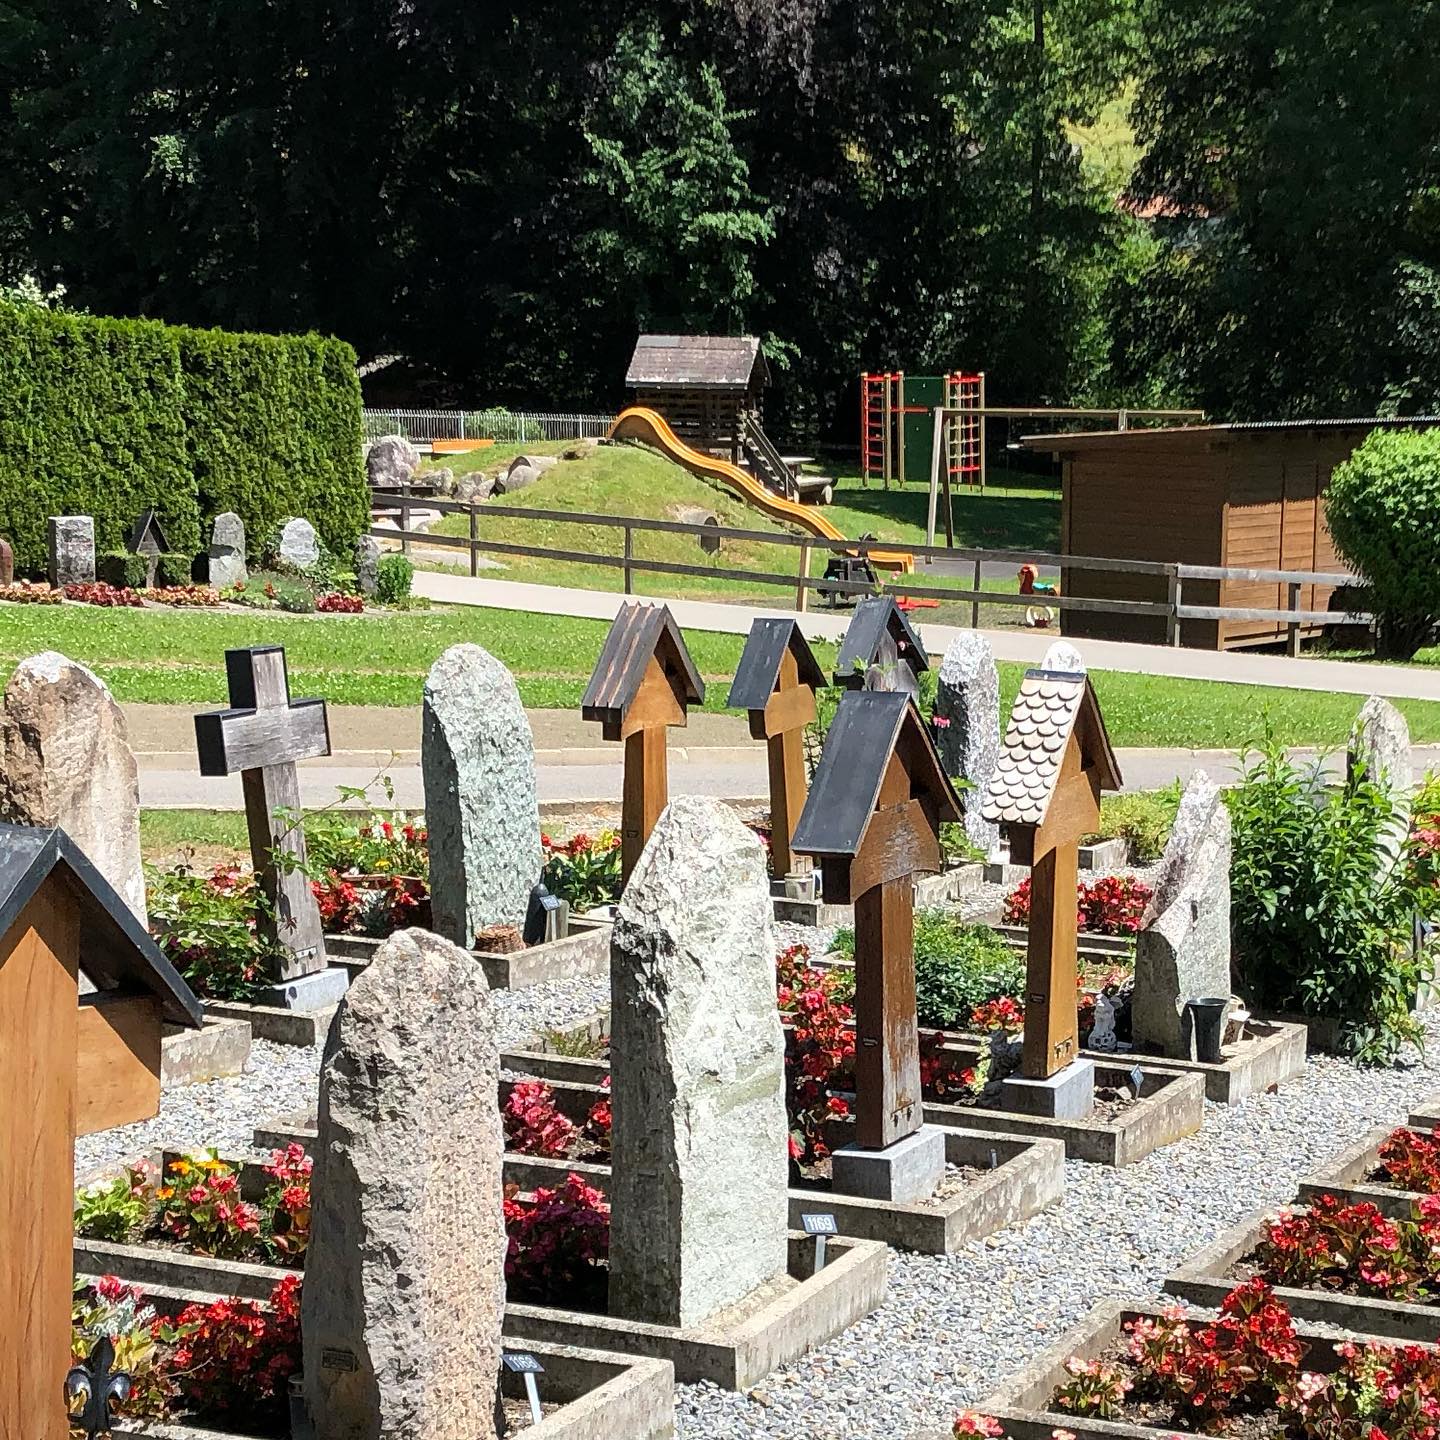 Cemetery, playground. The life cycle within 10 meters. How can design normalize death so people plan for the fullness of life?